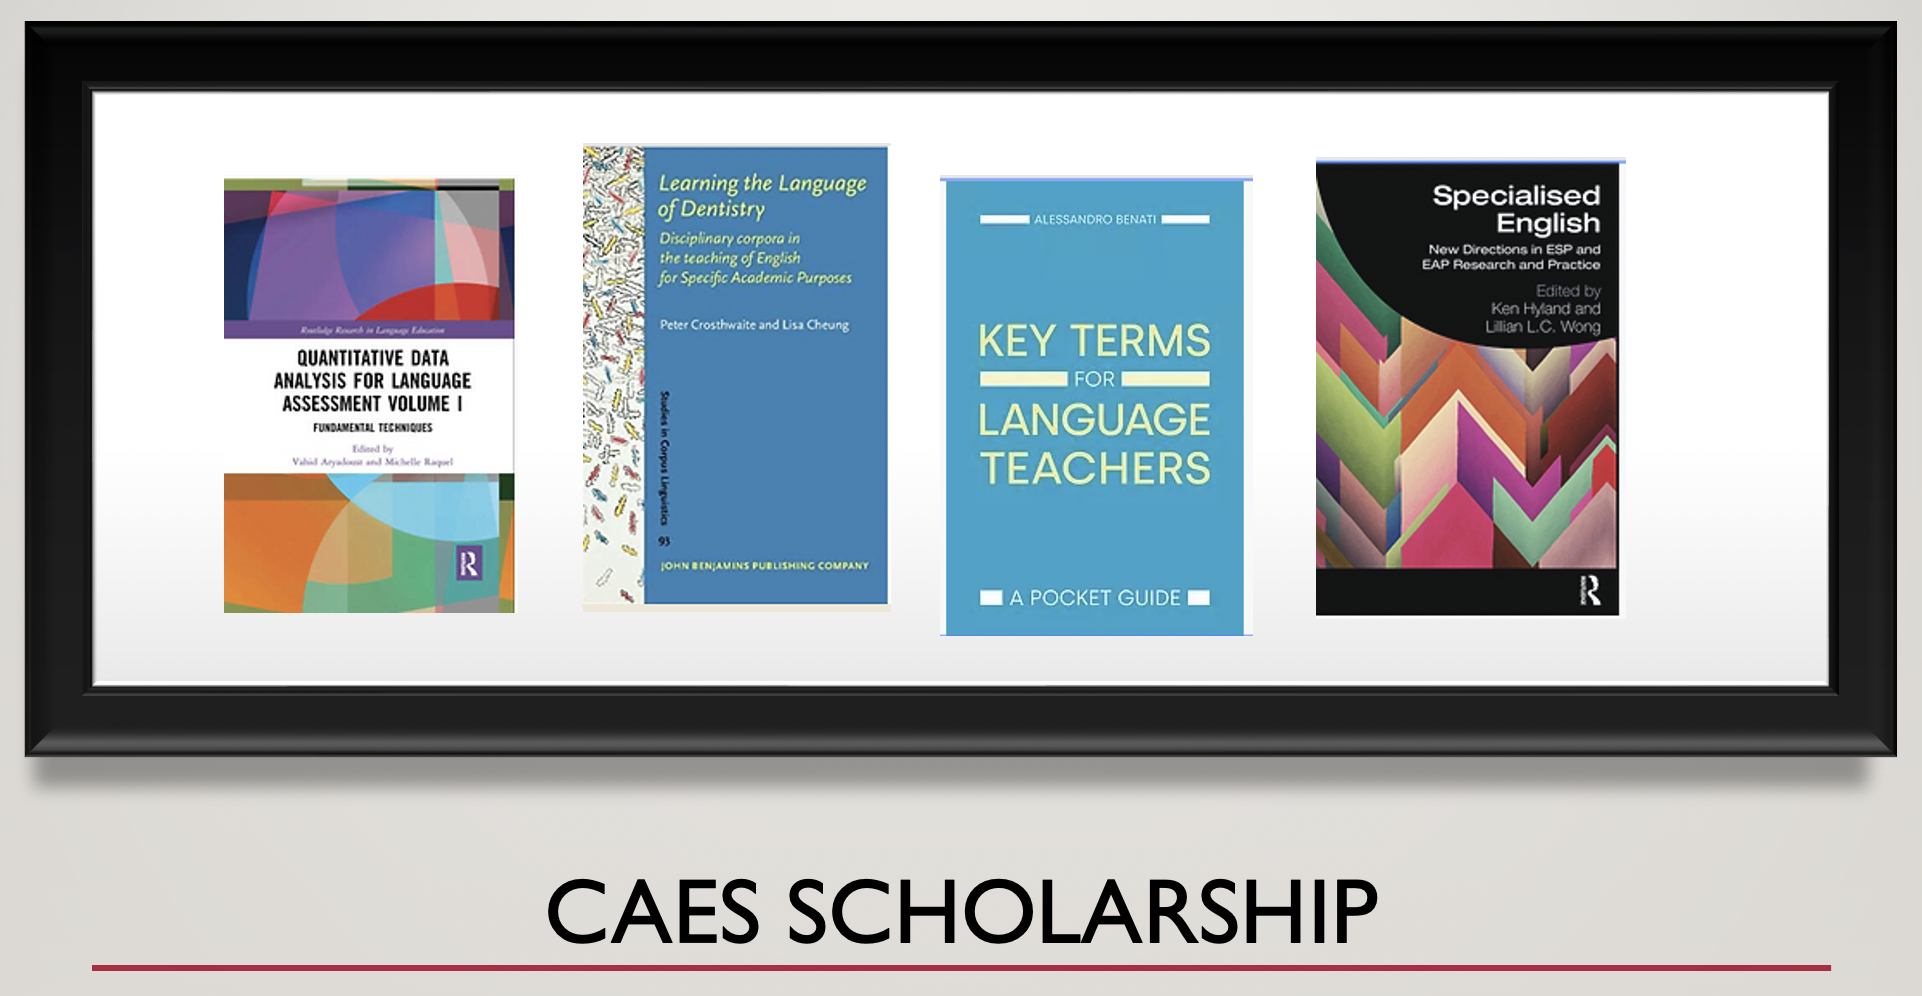 Poster Images - CAES ScholarshipCAES embraces a scholarship-informed teaching approach which provides a range of benefits to our staff and students. Through our thematic teams in Materials Development, Classroom Pedagogy and Assessment Practices, CAES staff apply the knowledge and skills gained in scholarship to their teaching curriculum and activities, demonstrating continuous development, innovation and improvement in their teaching practice.  https://www.caesscholarship.hku.hk/